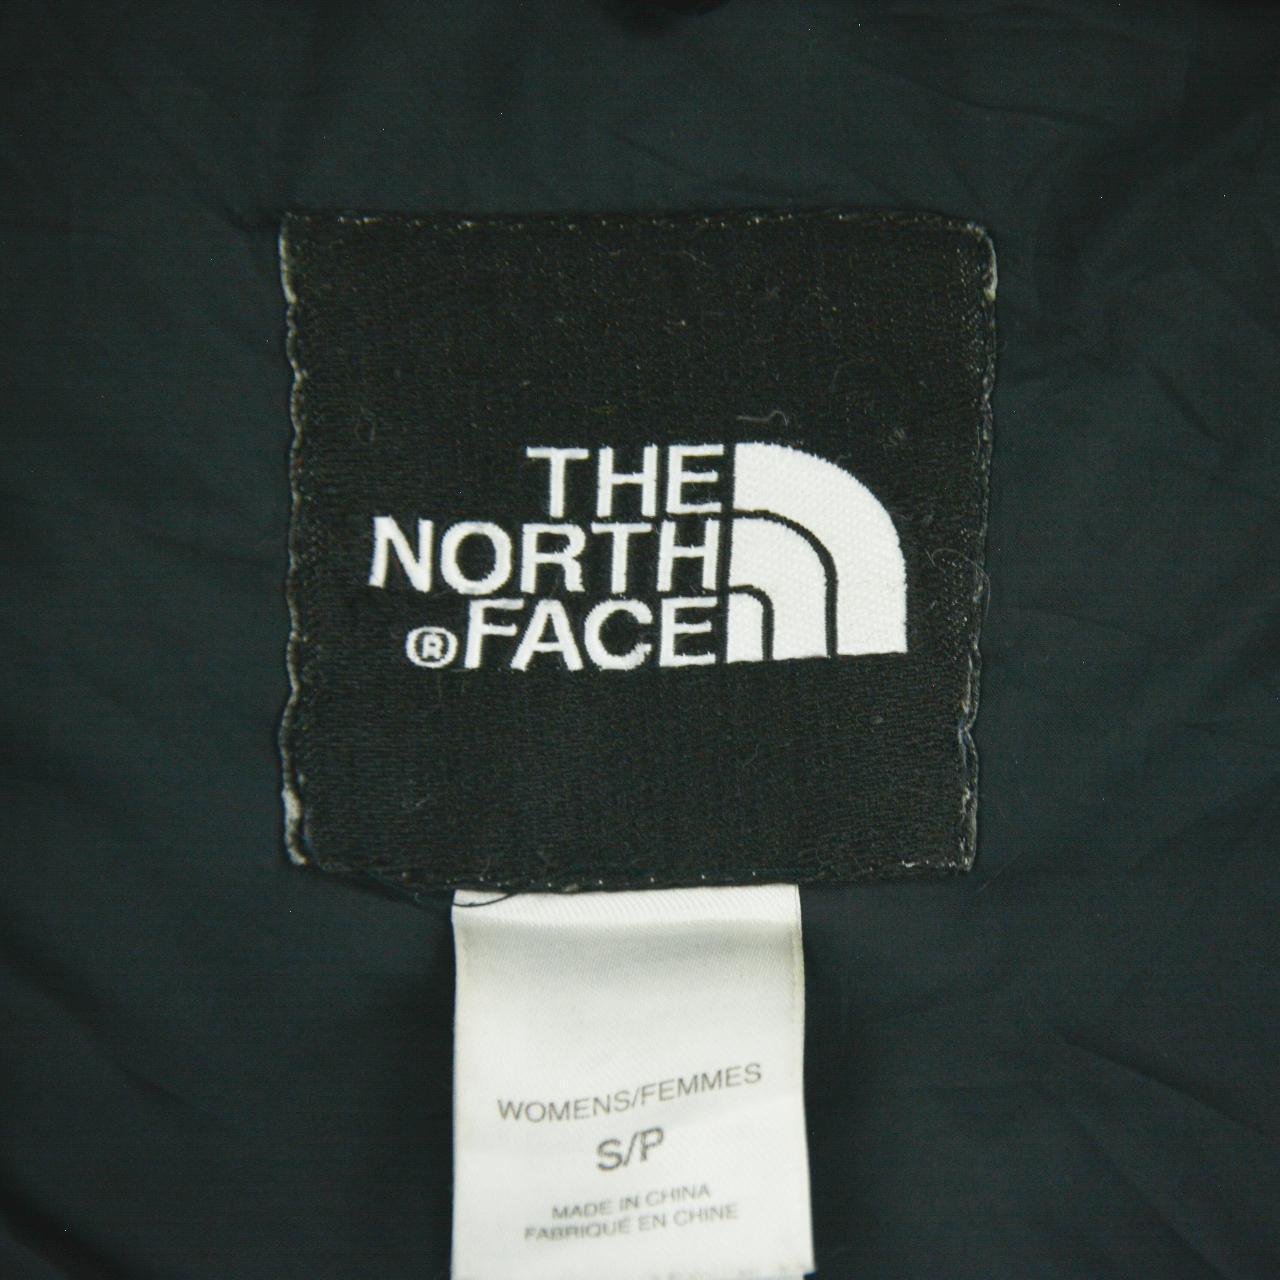 Vintage The North Face Puffa Jacket Women's Size S - Known Source